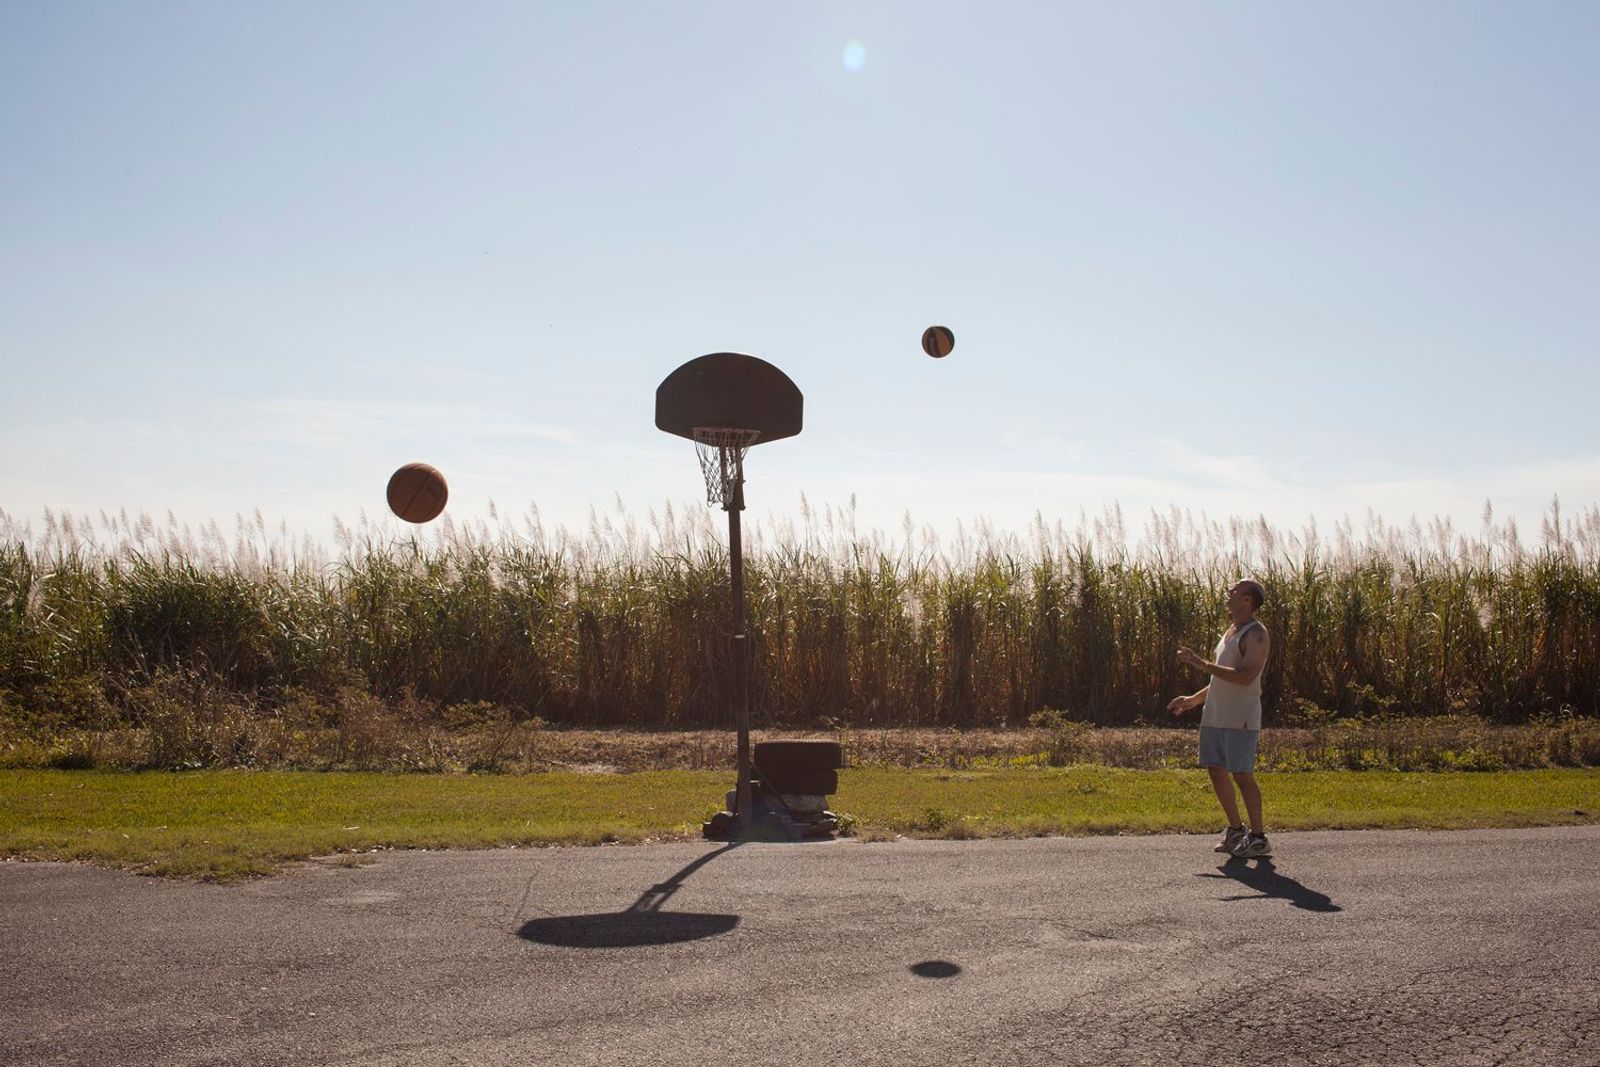 © Sofia Valiente - Richard playing basketball in the village.